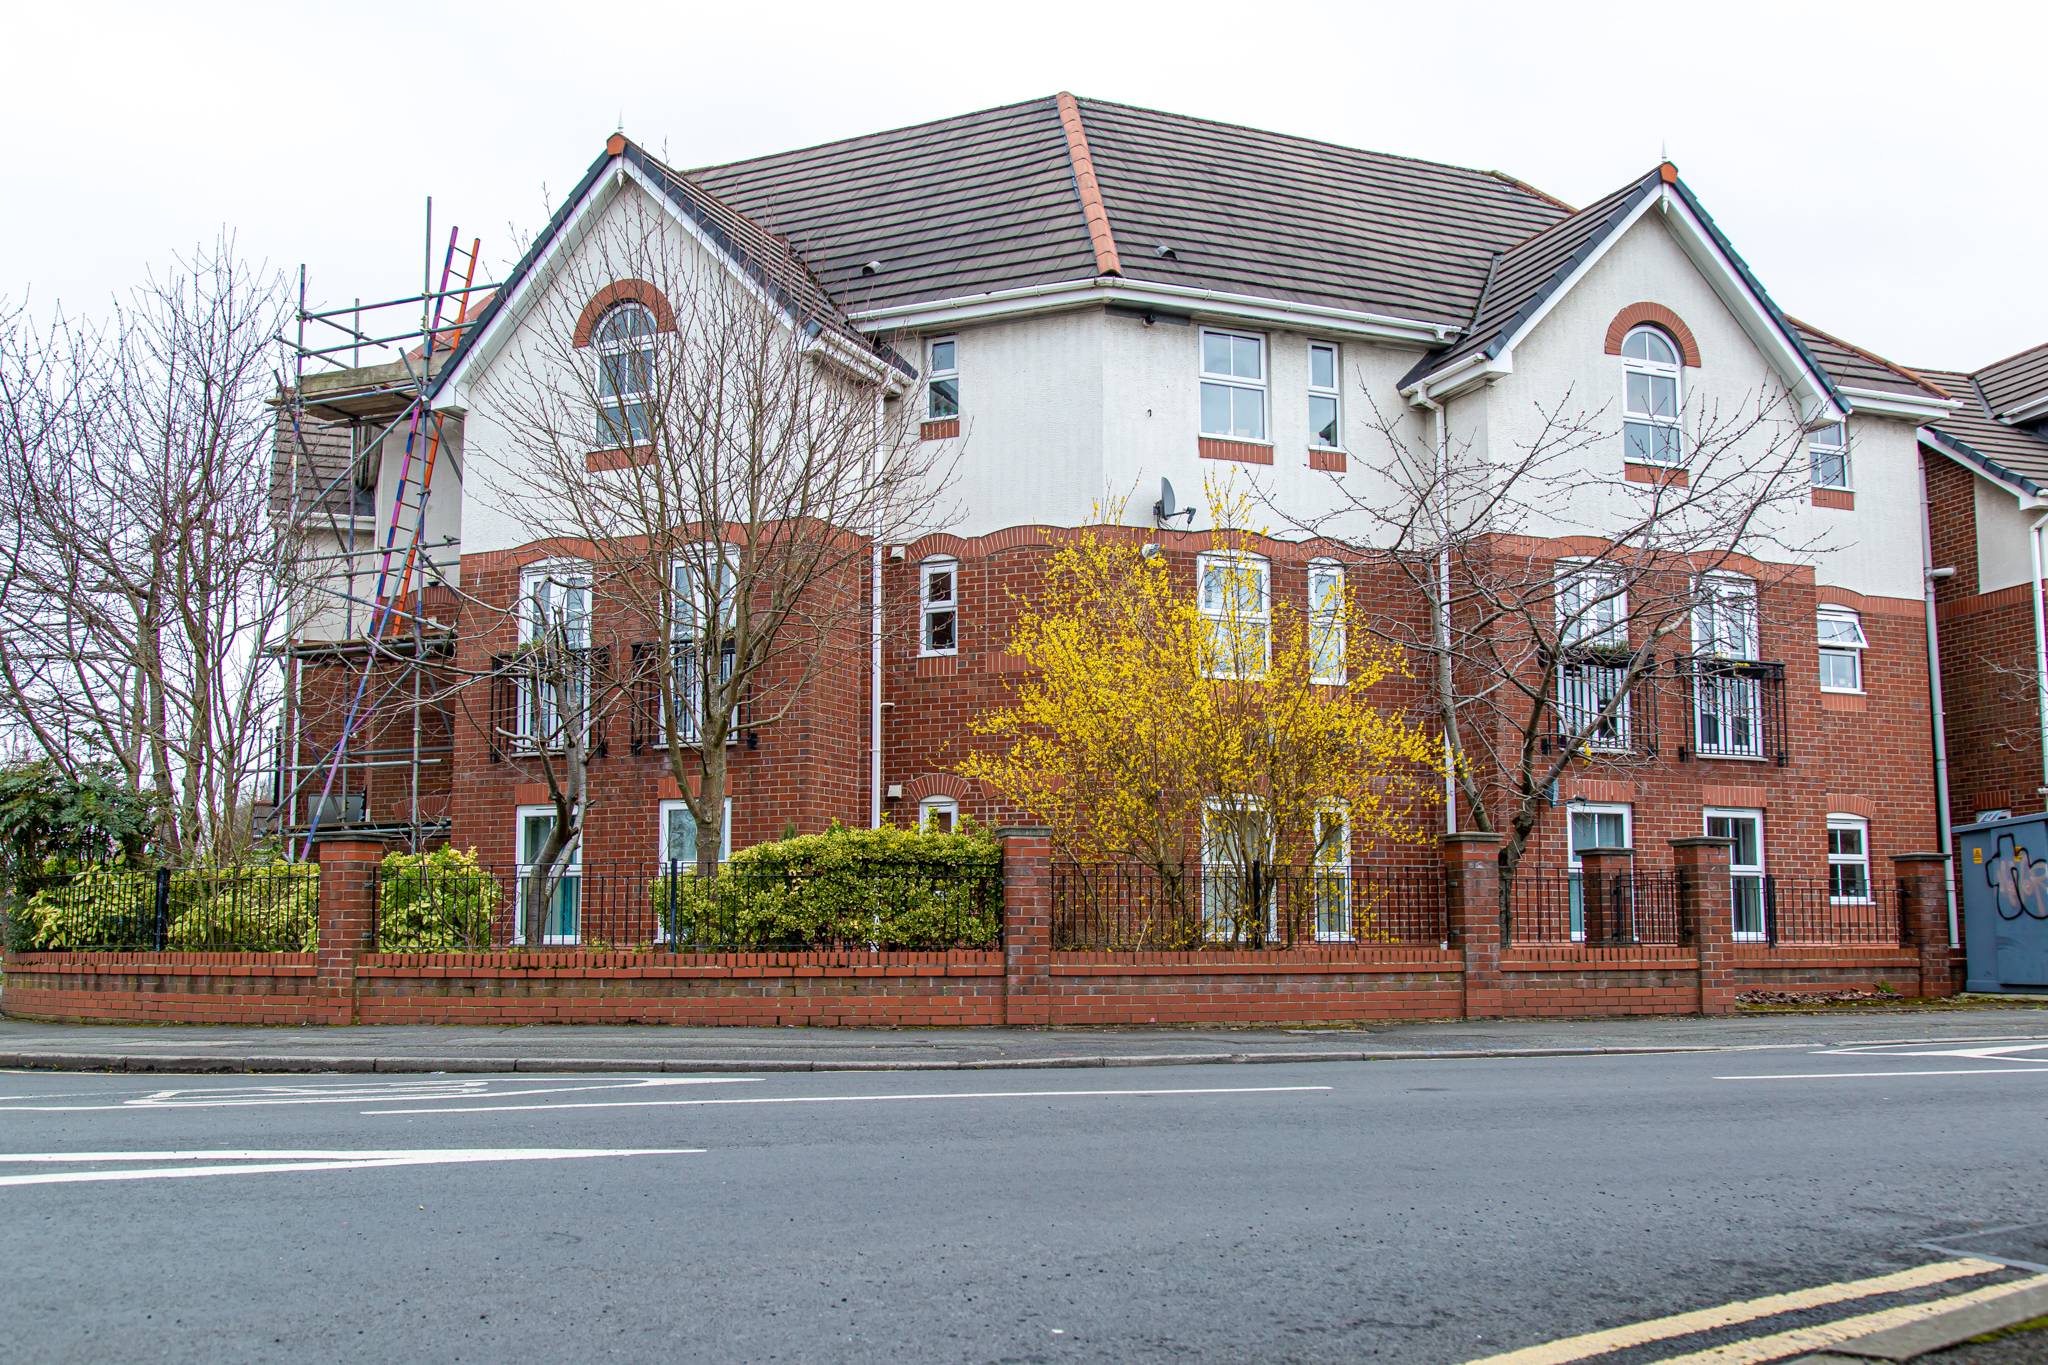 A well-presented two double bedroom apartment in a contemporary development within a short distance from both Didsbury & Withington villages. Open-plan Living/Dining/Kitchen, two double bedrooms and bathroom suite. Two securely gated parking spaces.